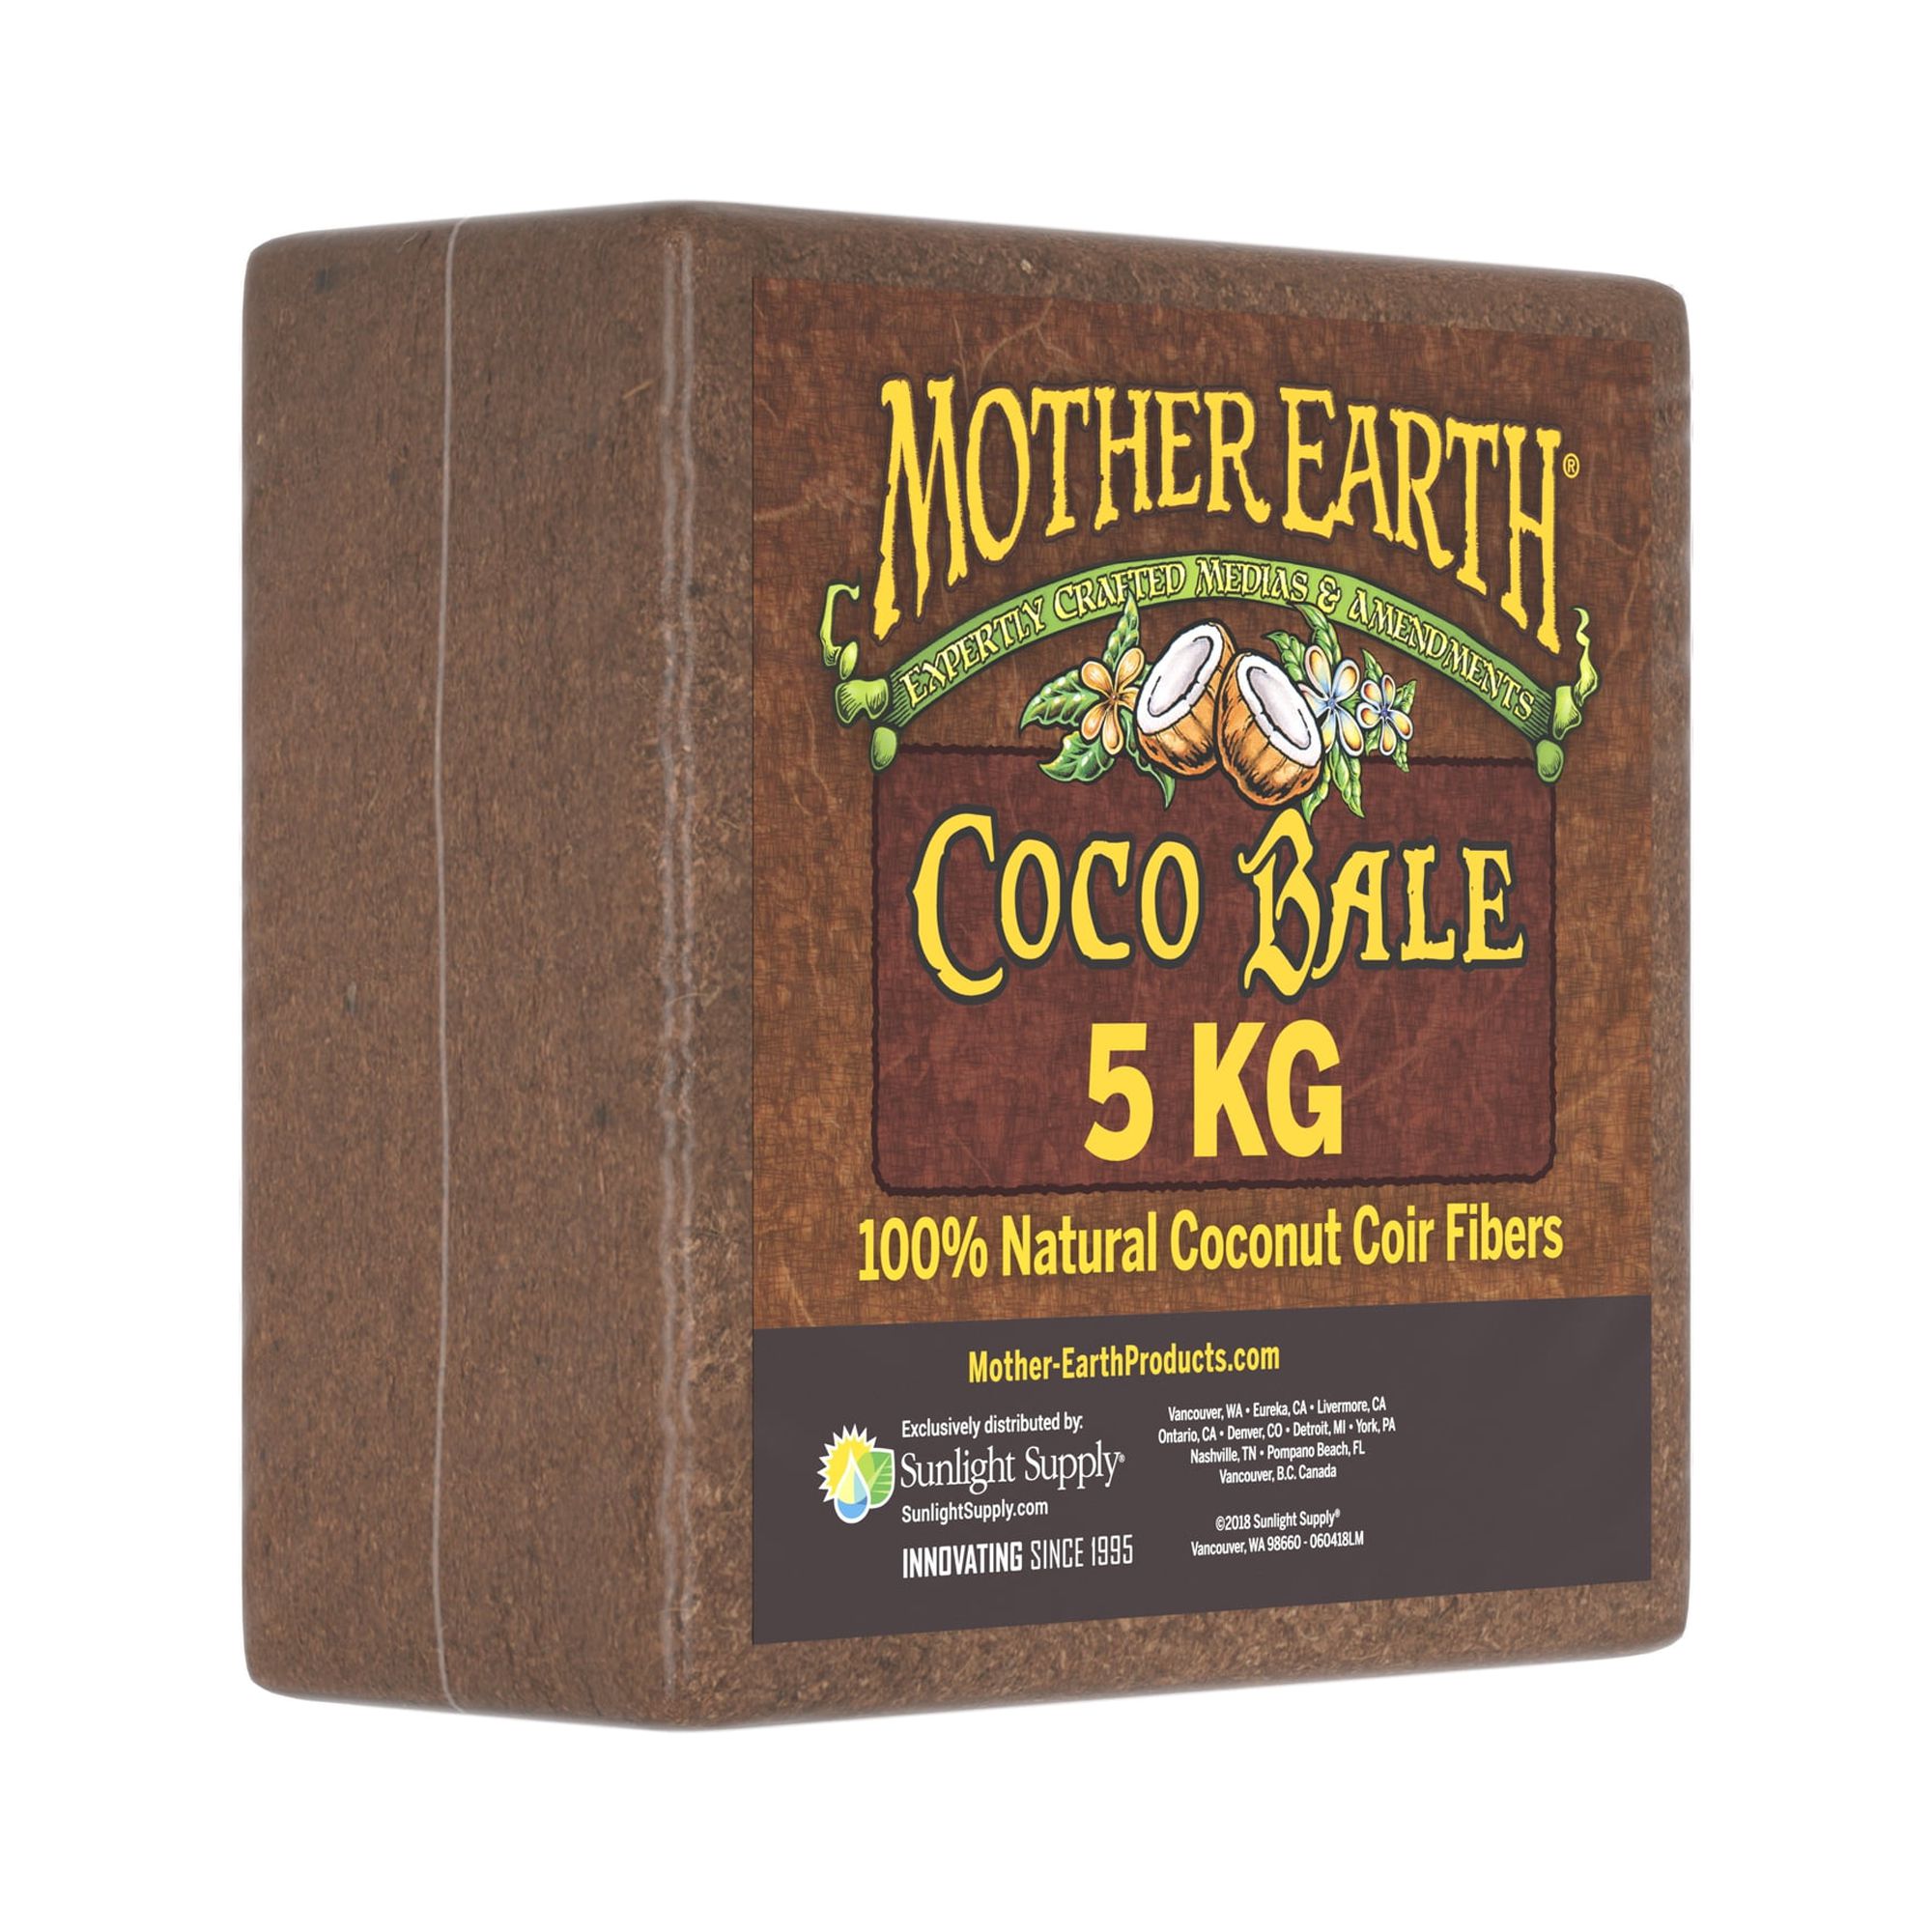 Mother Earth Coco Bale 5 kg, 100% Coconut Coir Fibers - image 3 of 8